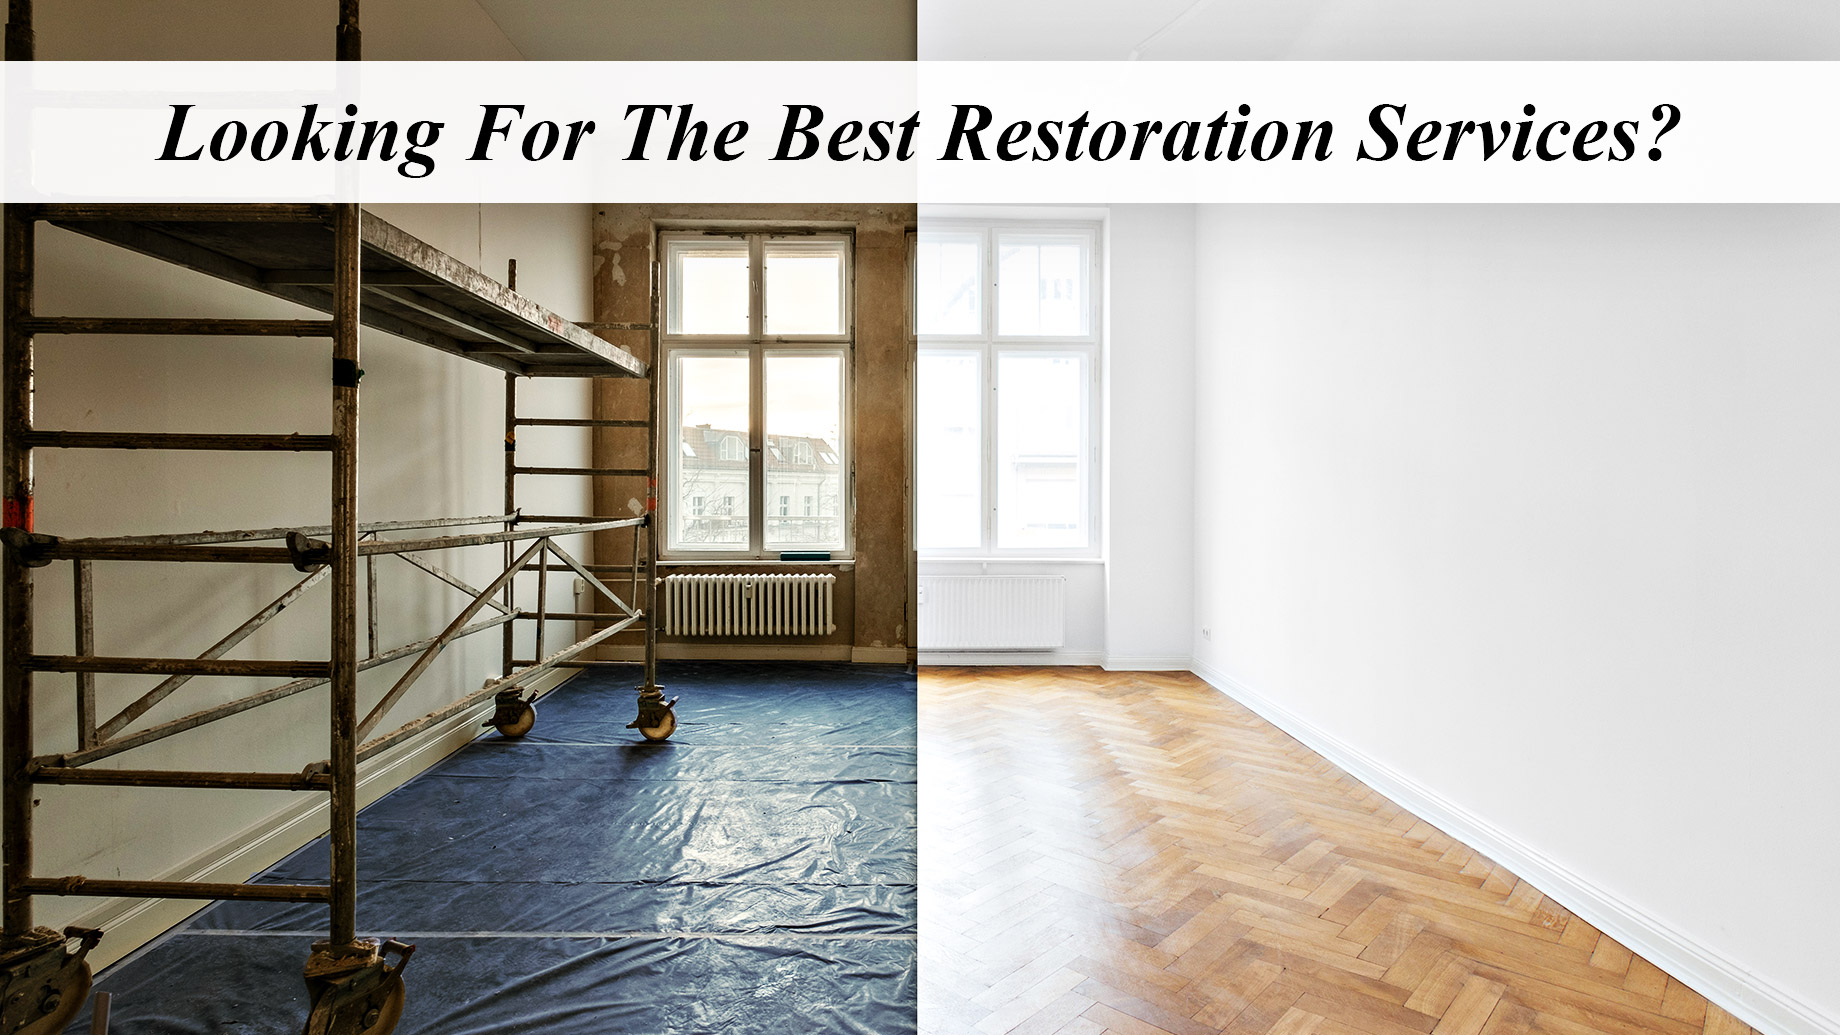 Looking For The Best Restoration Services?